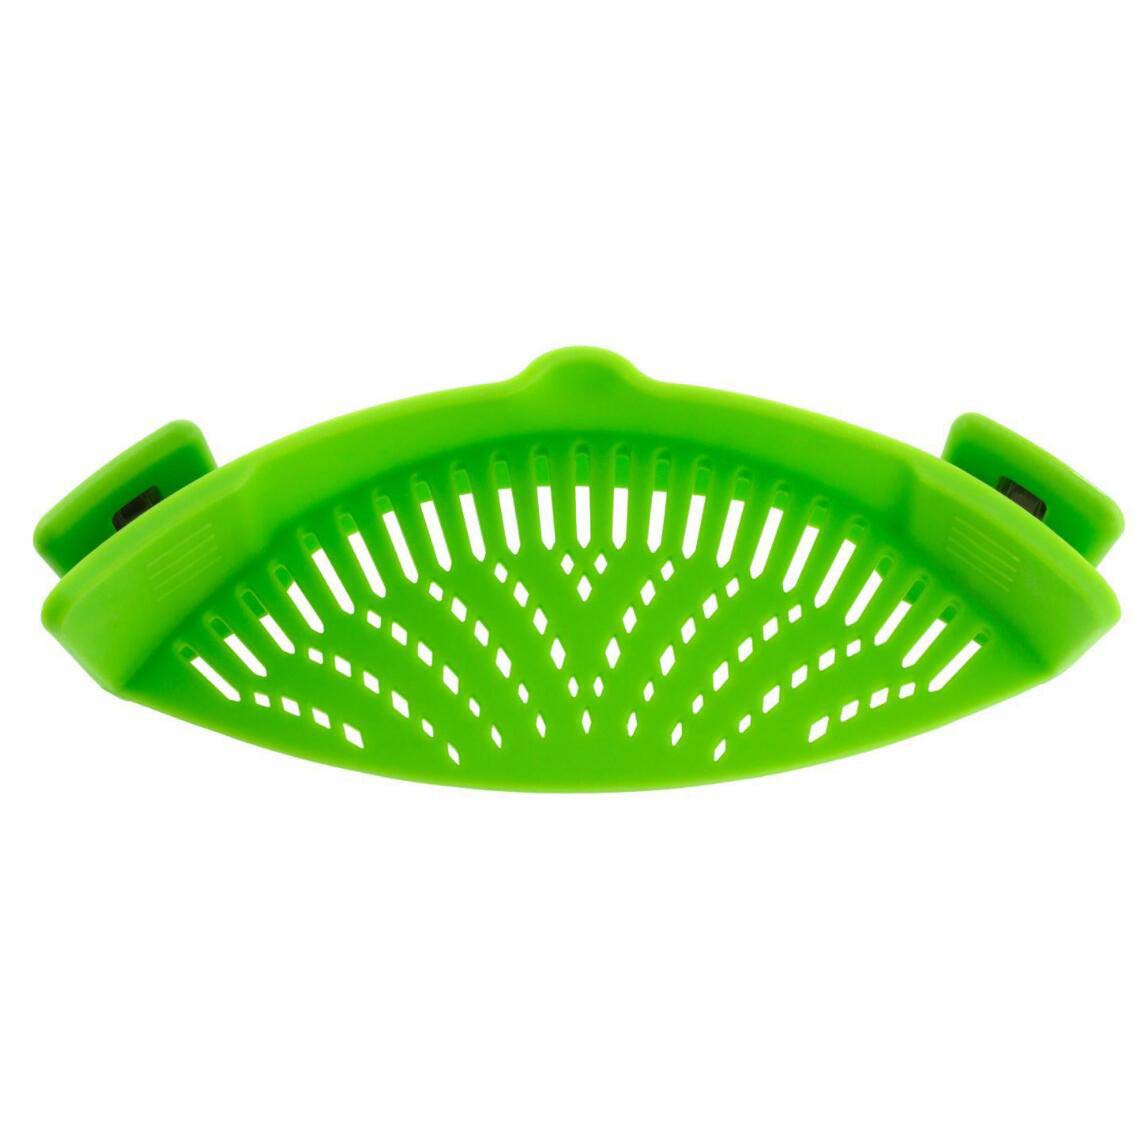 2018 NEW product Clip on silicone colander,kitchen strainer,Easy and fit all pot colander strainer